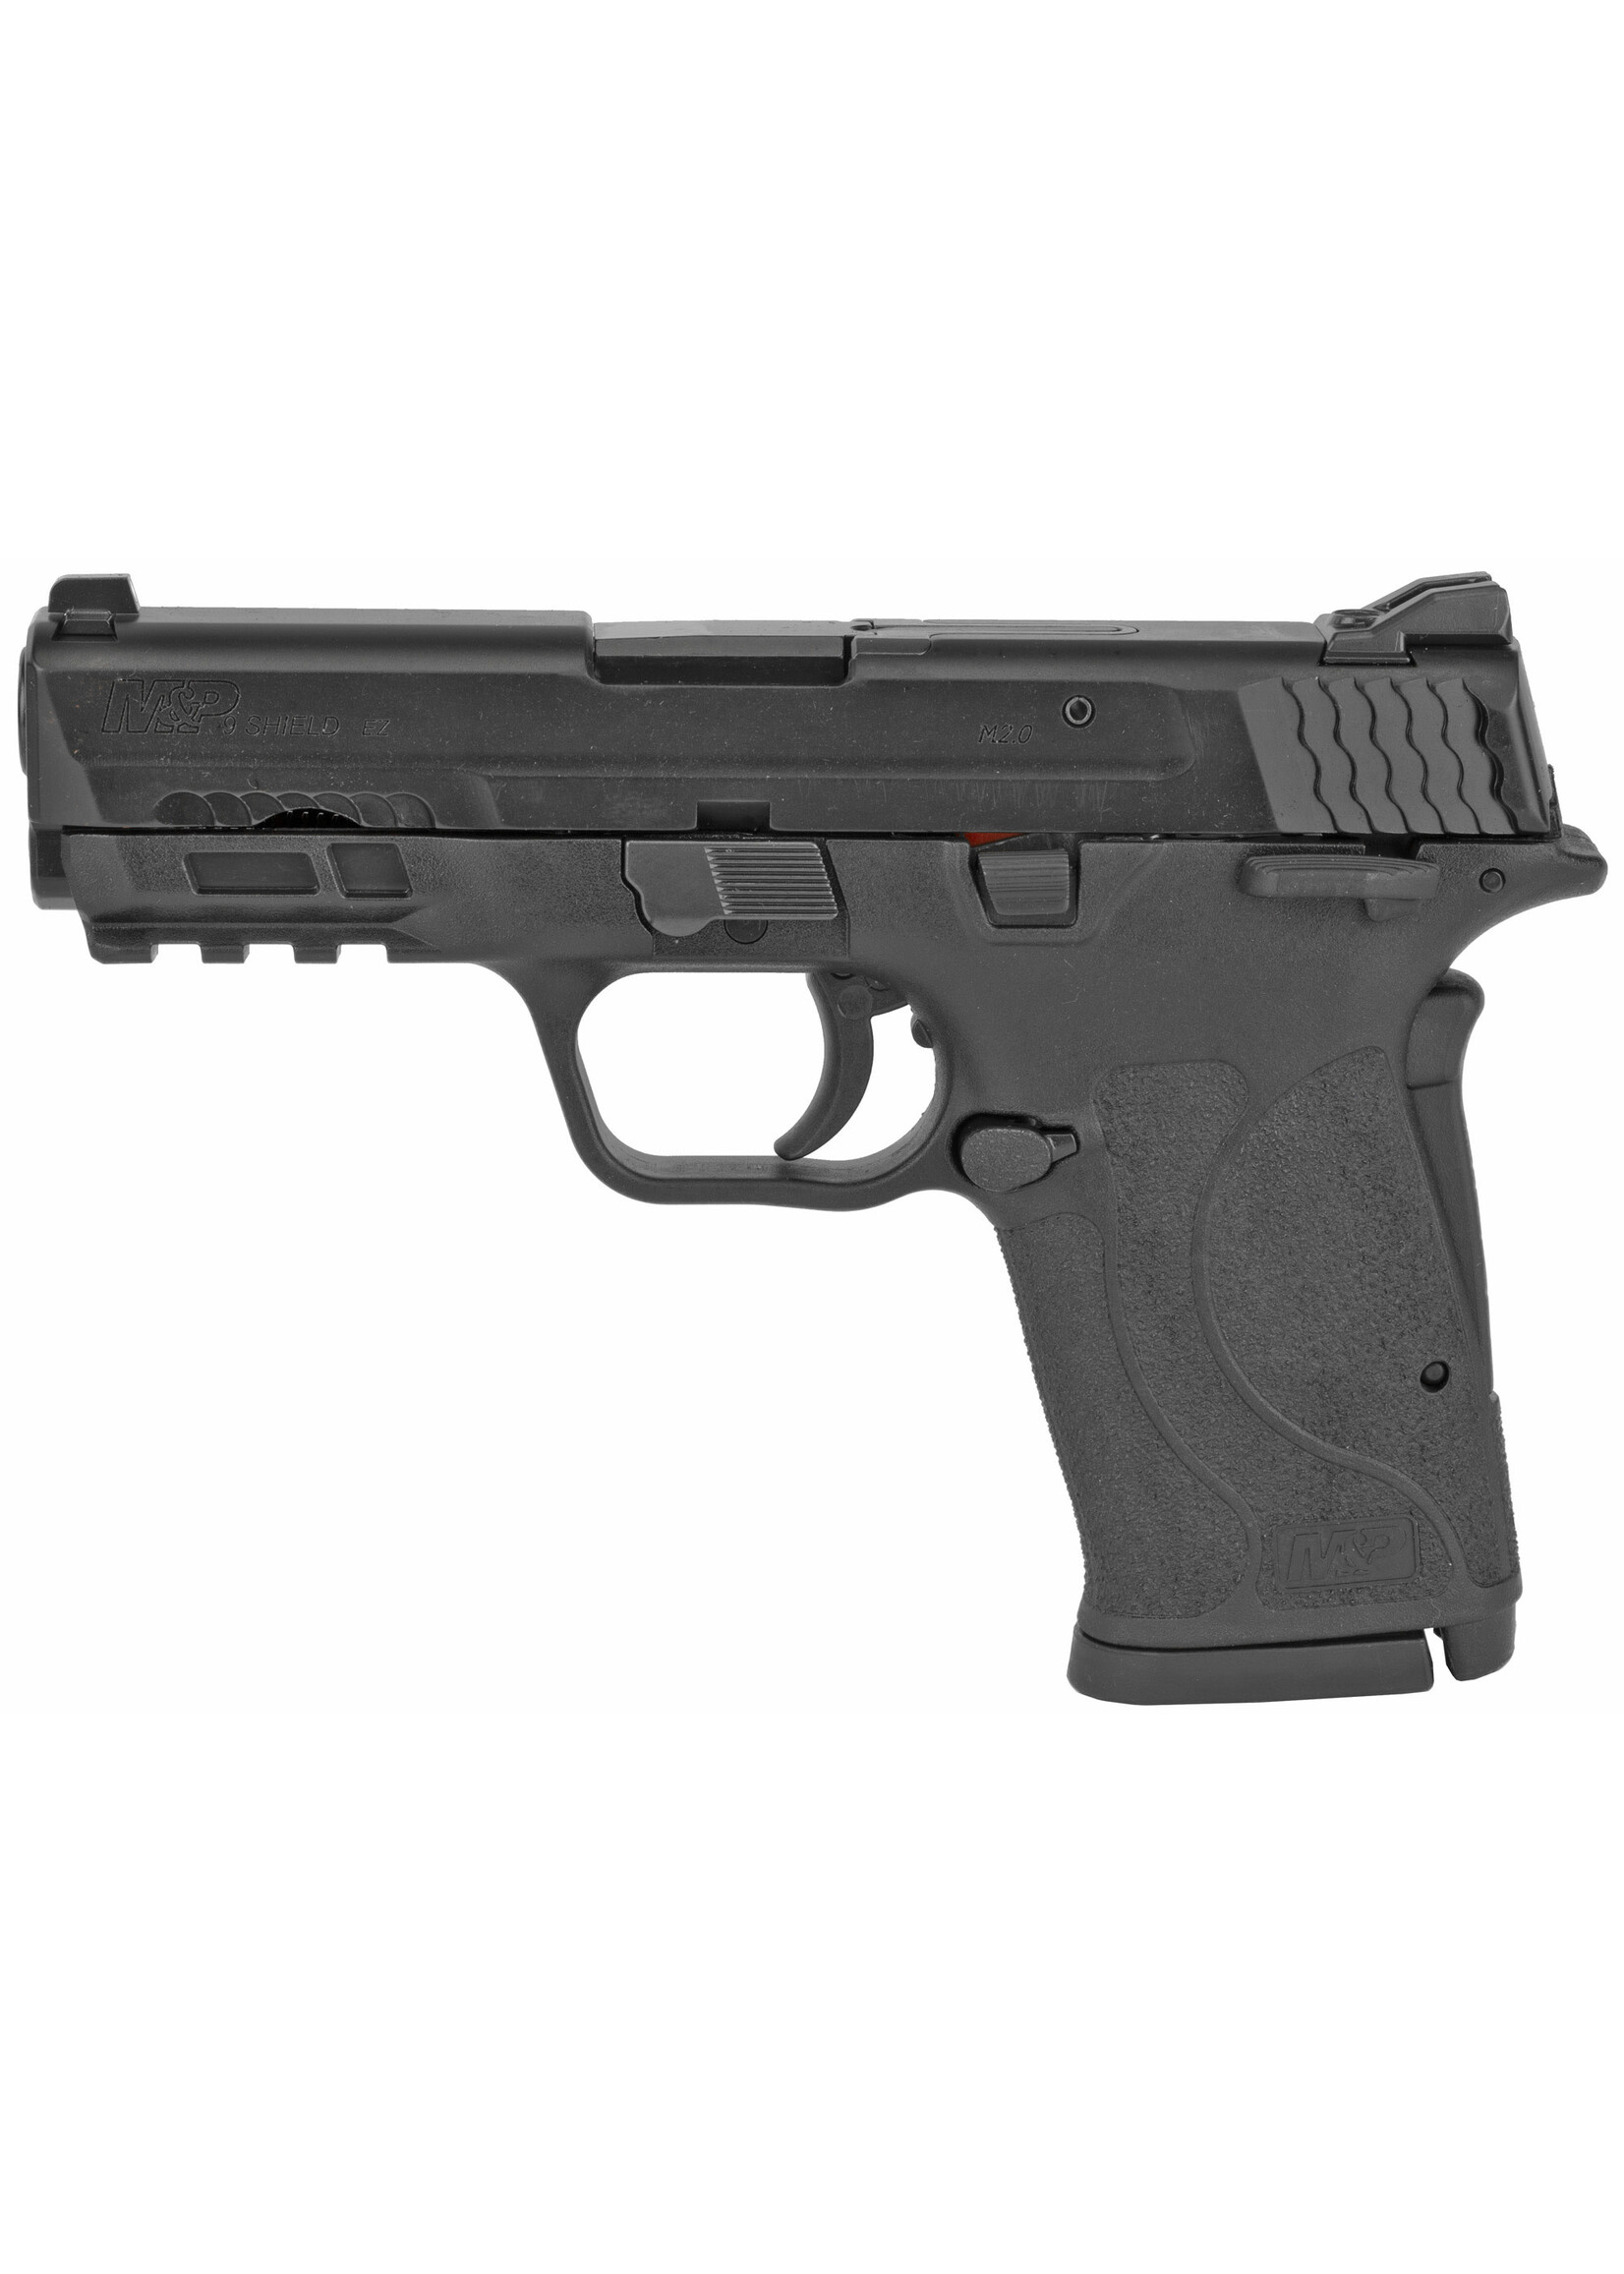 Smith and Wesson (S&W) Smith & Wesson 12436 M&P Shield EZ M2.0 Compact Slim 9mm Luger 8+1 3.67" Black Armornite Barrel & Serrated Slide, Matte Black Polymer Frame w/Picatinny Rail Black Polymer Grips Right Hand